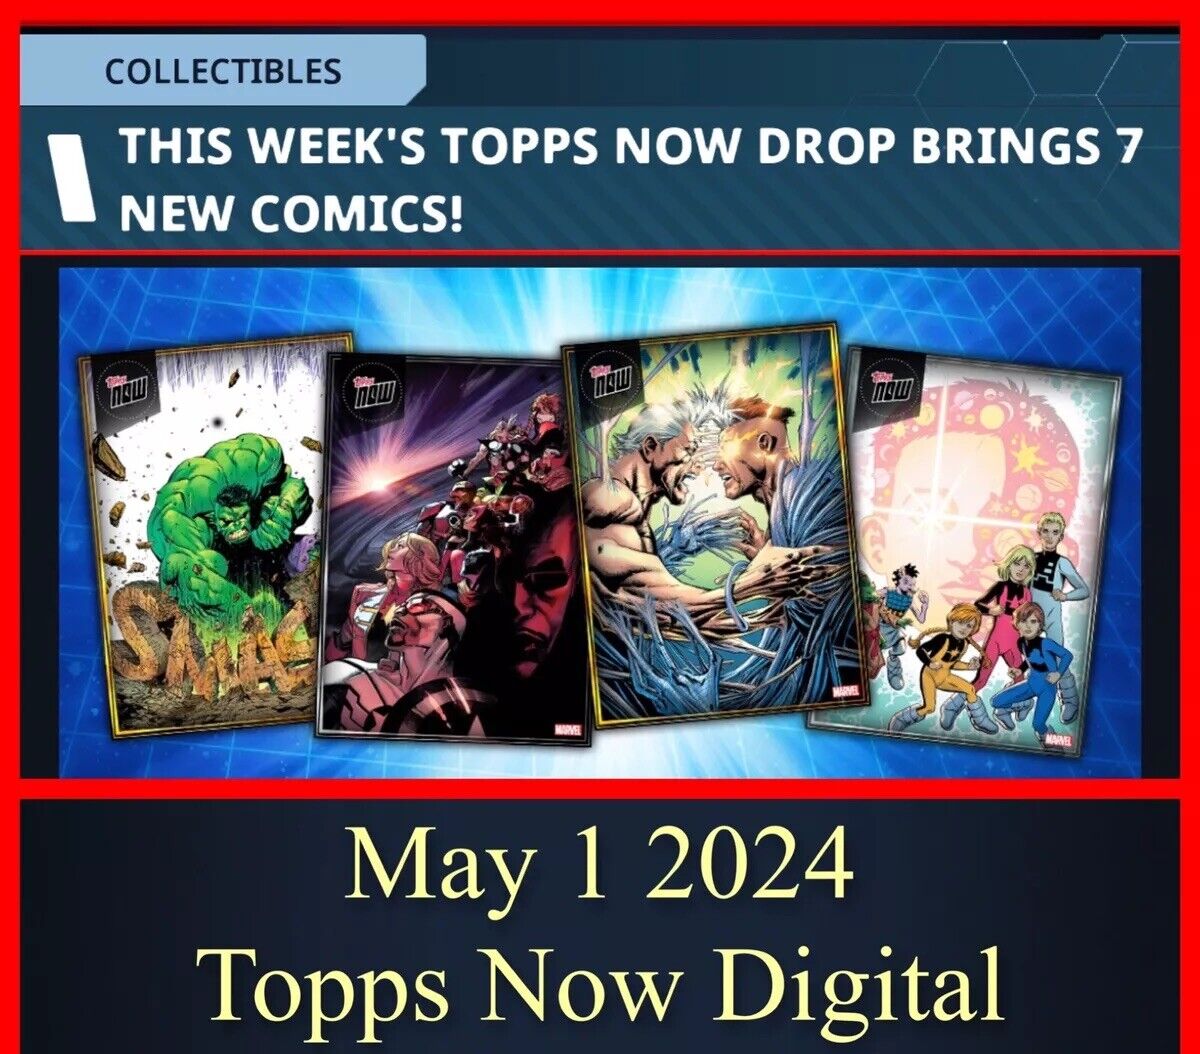 TOPPS MARVEL COLLECT TOPPS NOW MAY 1 2024 SILVER ONLY 7 CARD SET